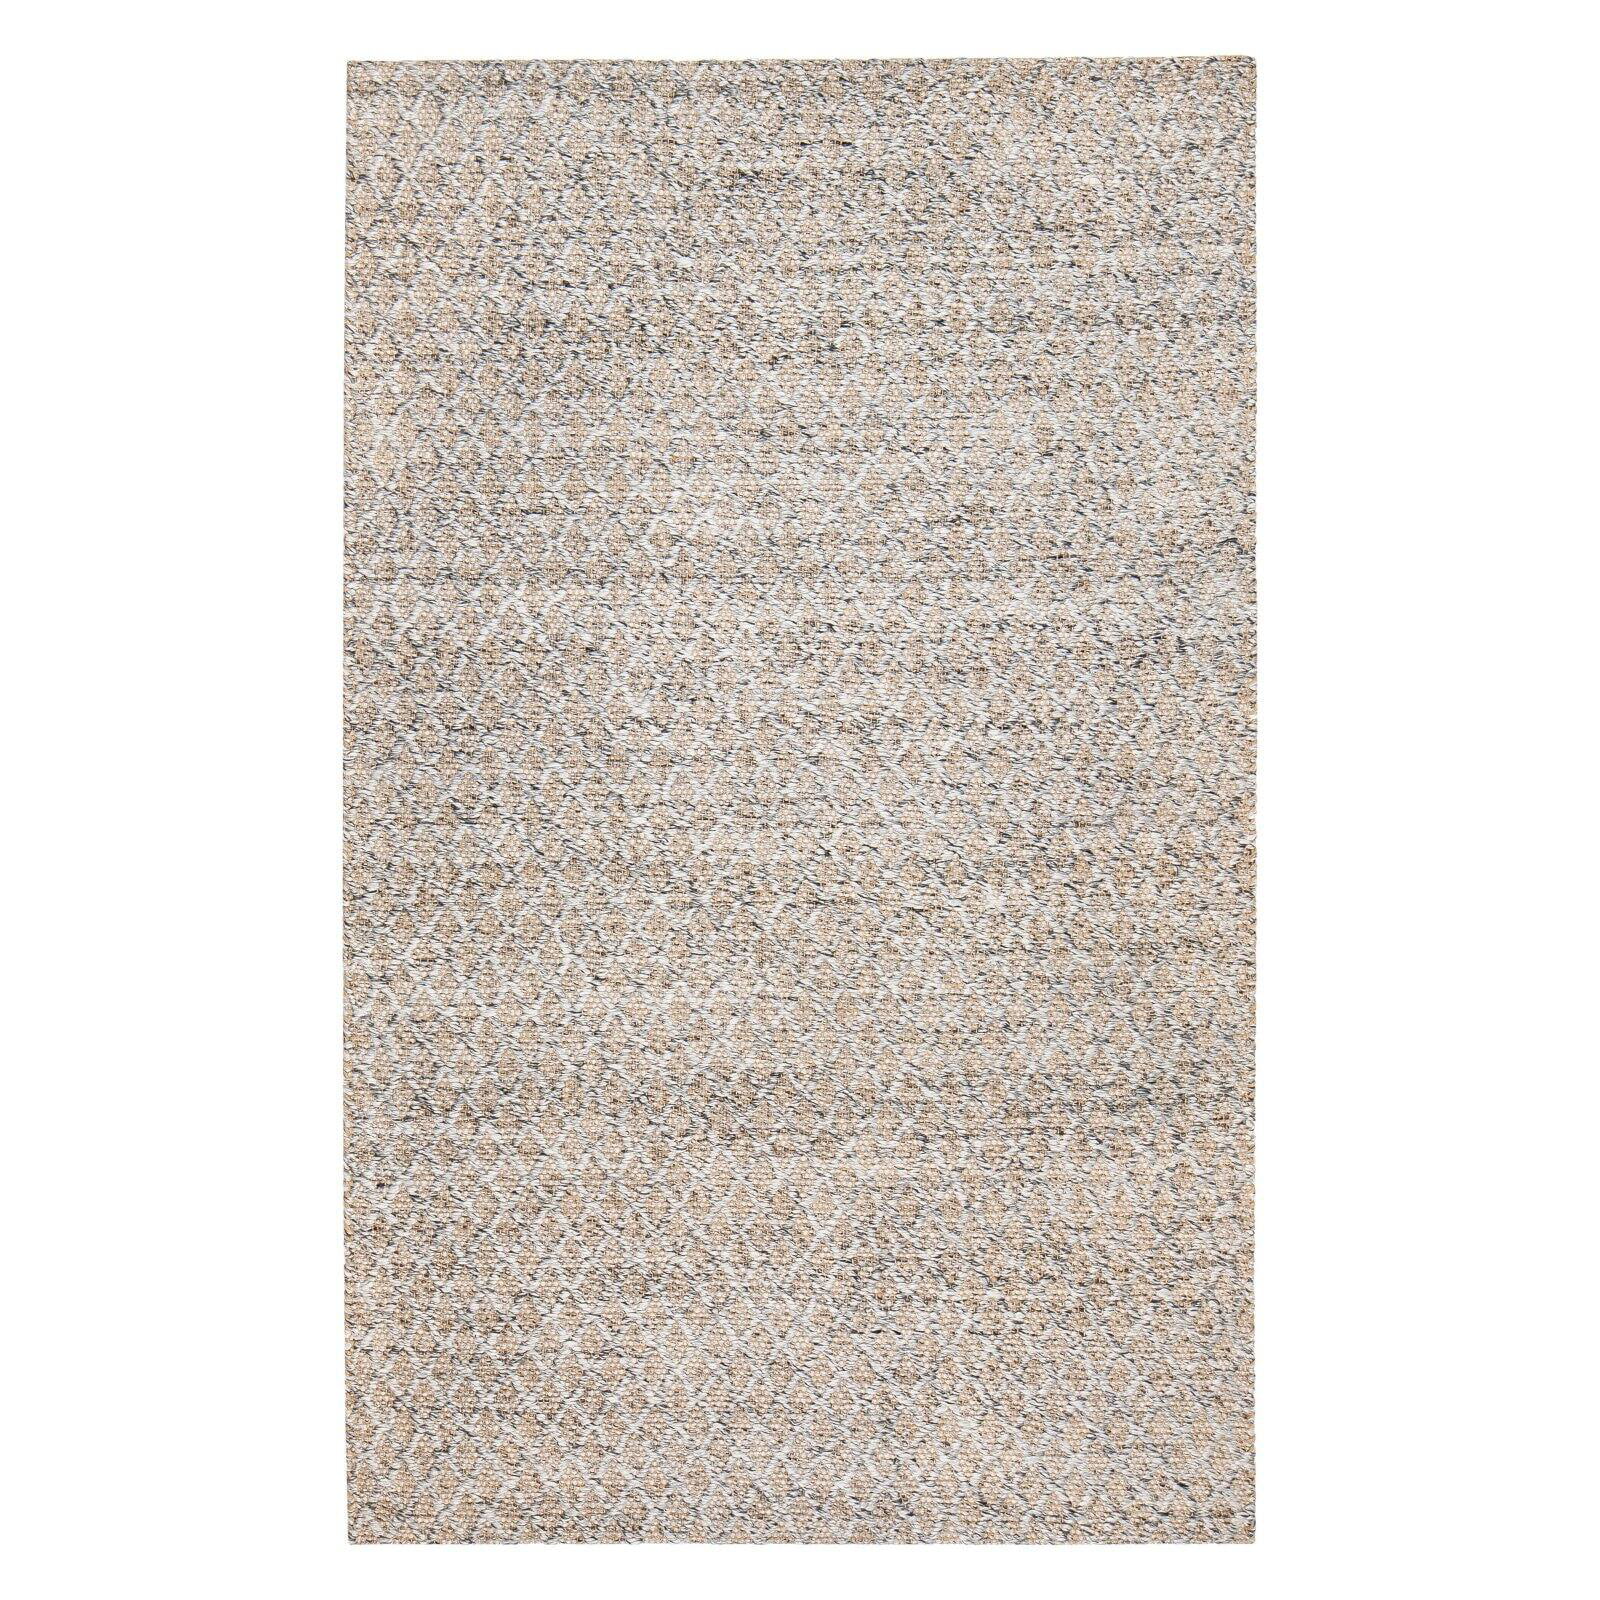 Picture of Anji Mountain AMB0423-0058 5 x 8 ft. Sigis Soft Jute & Wool-Alternative Area Rug - Gray